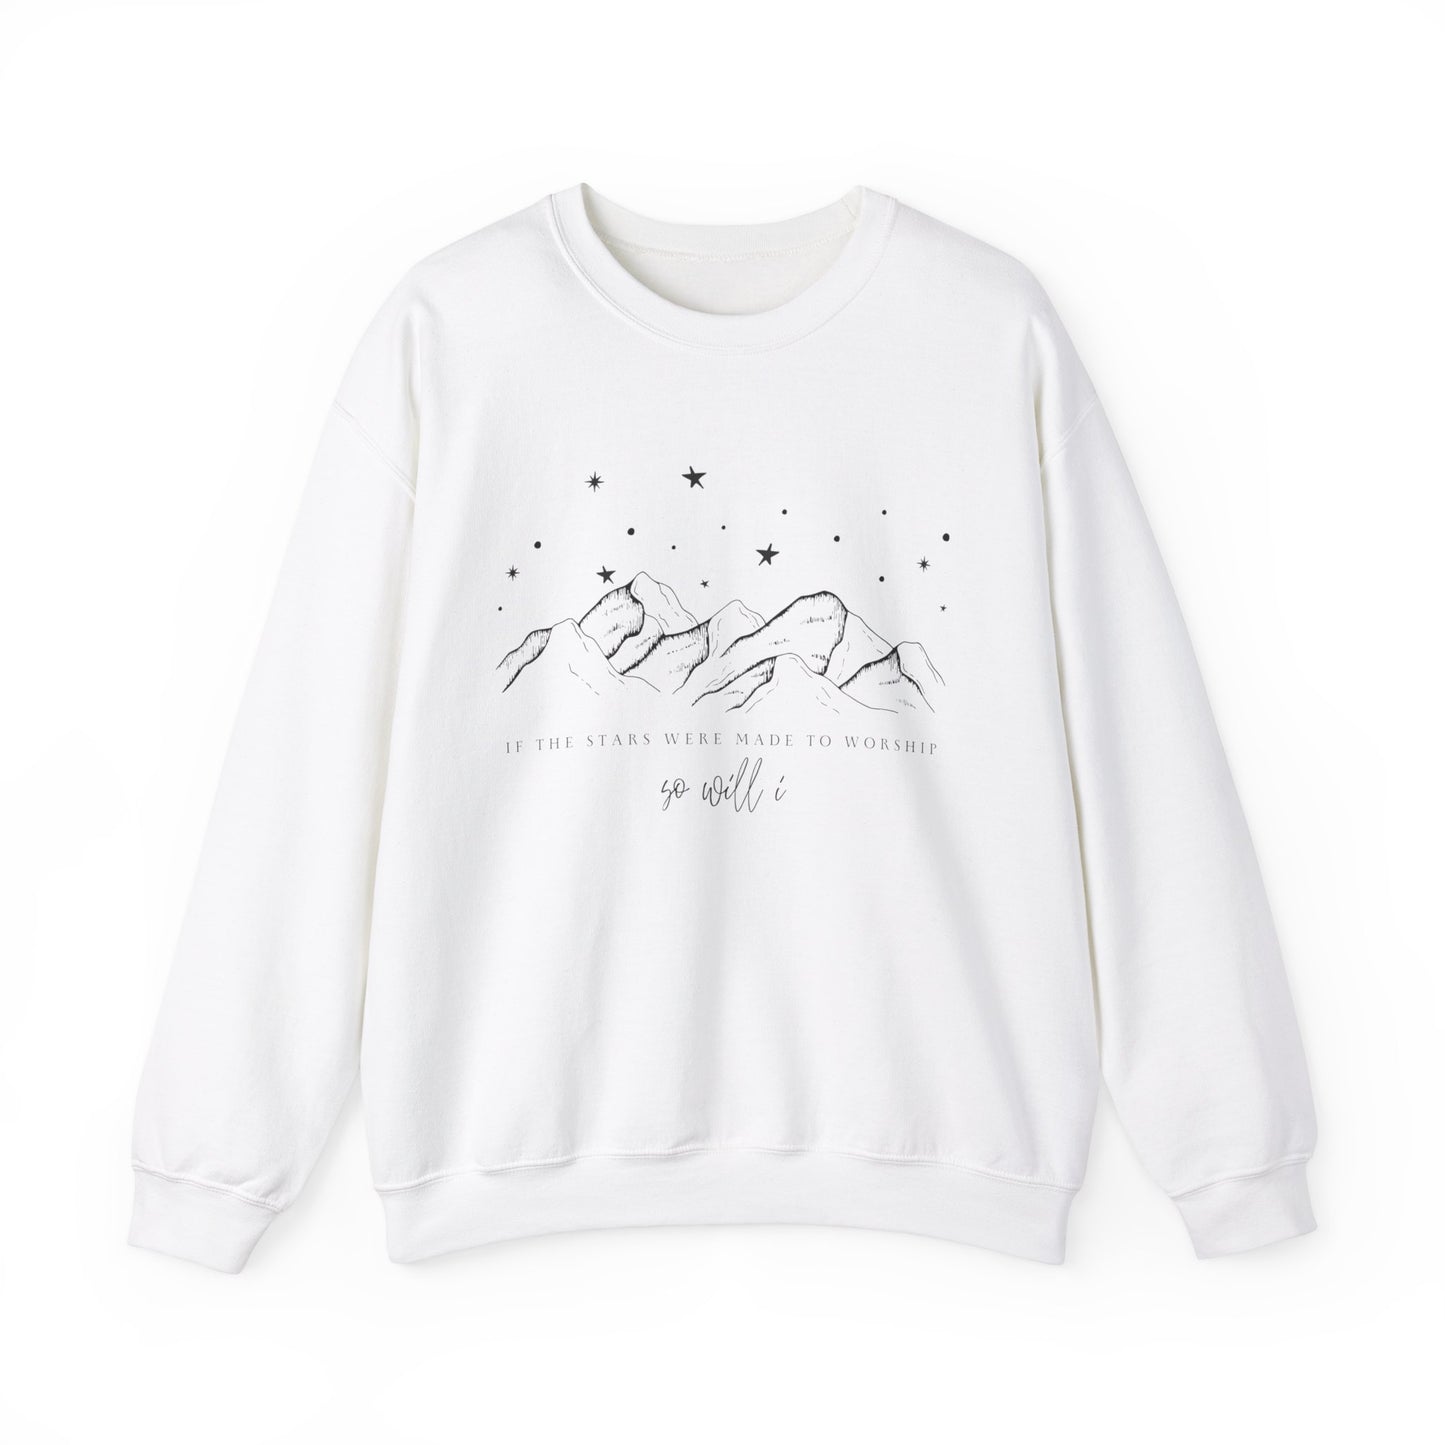 If The Stars Were Made To Worship Trendy Scripture Crewneck For Women, Perfect For Religious Students, Teachers, Perfect Gift For Christian Faith, Catholic School Gift & Faithful Individuals